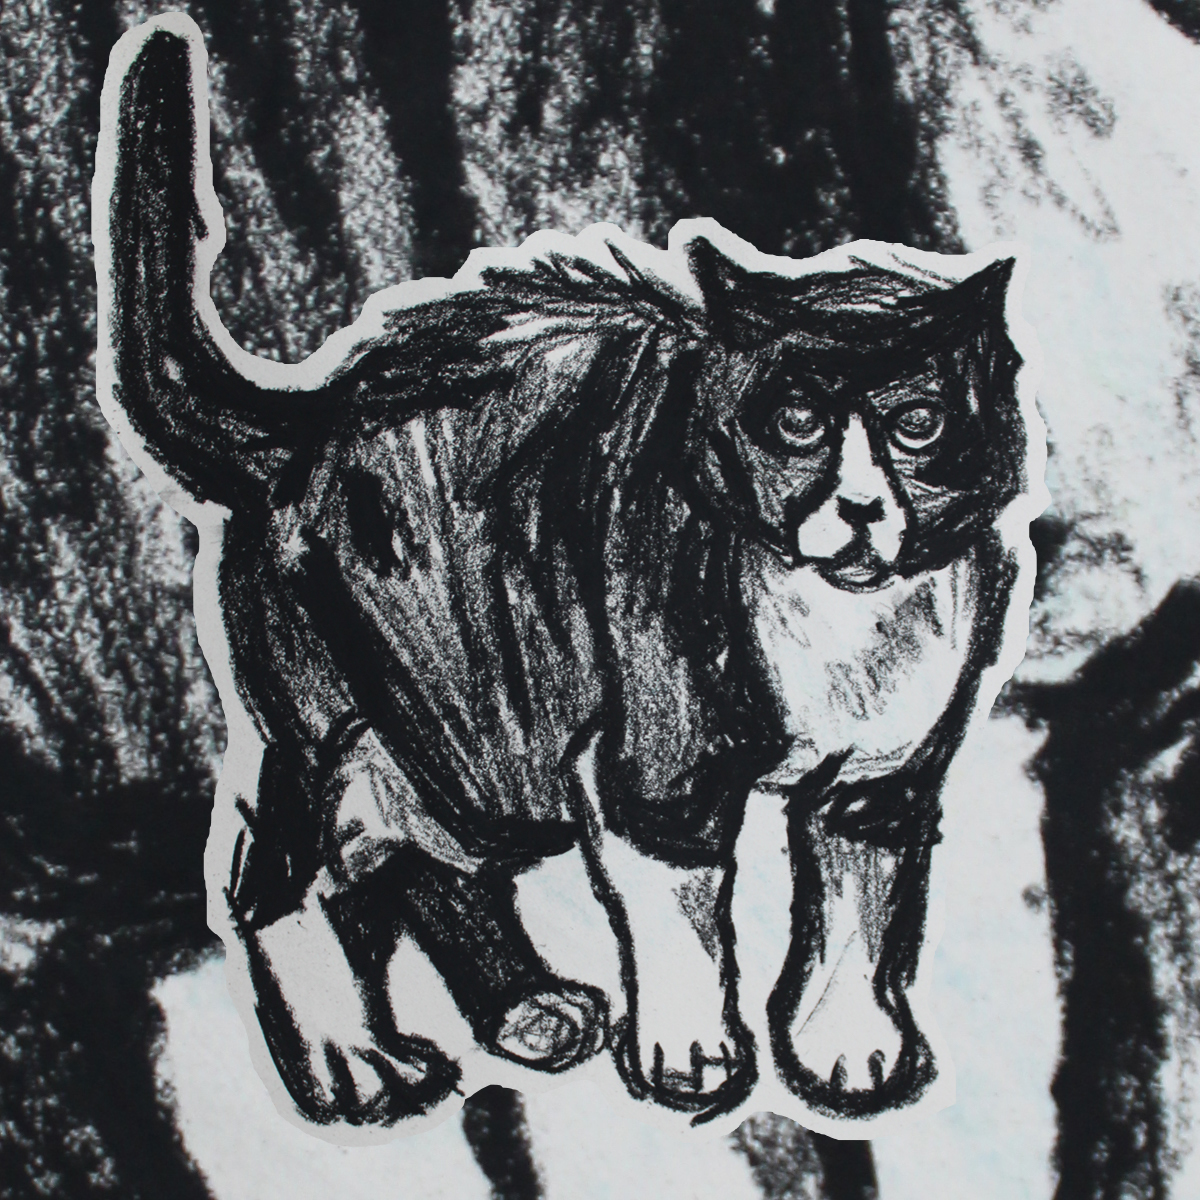 A charcoal drawing of a black and white cat standing up. The cat has a white border and the background is a section of the drawing of the cat, zoomed in to the point of abstraction.